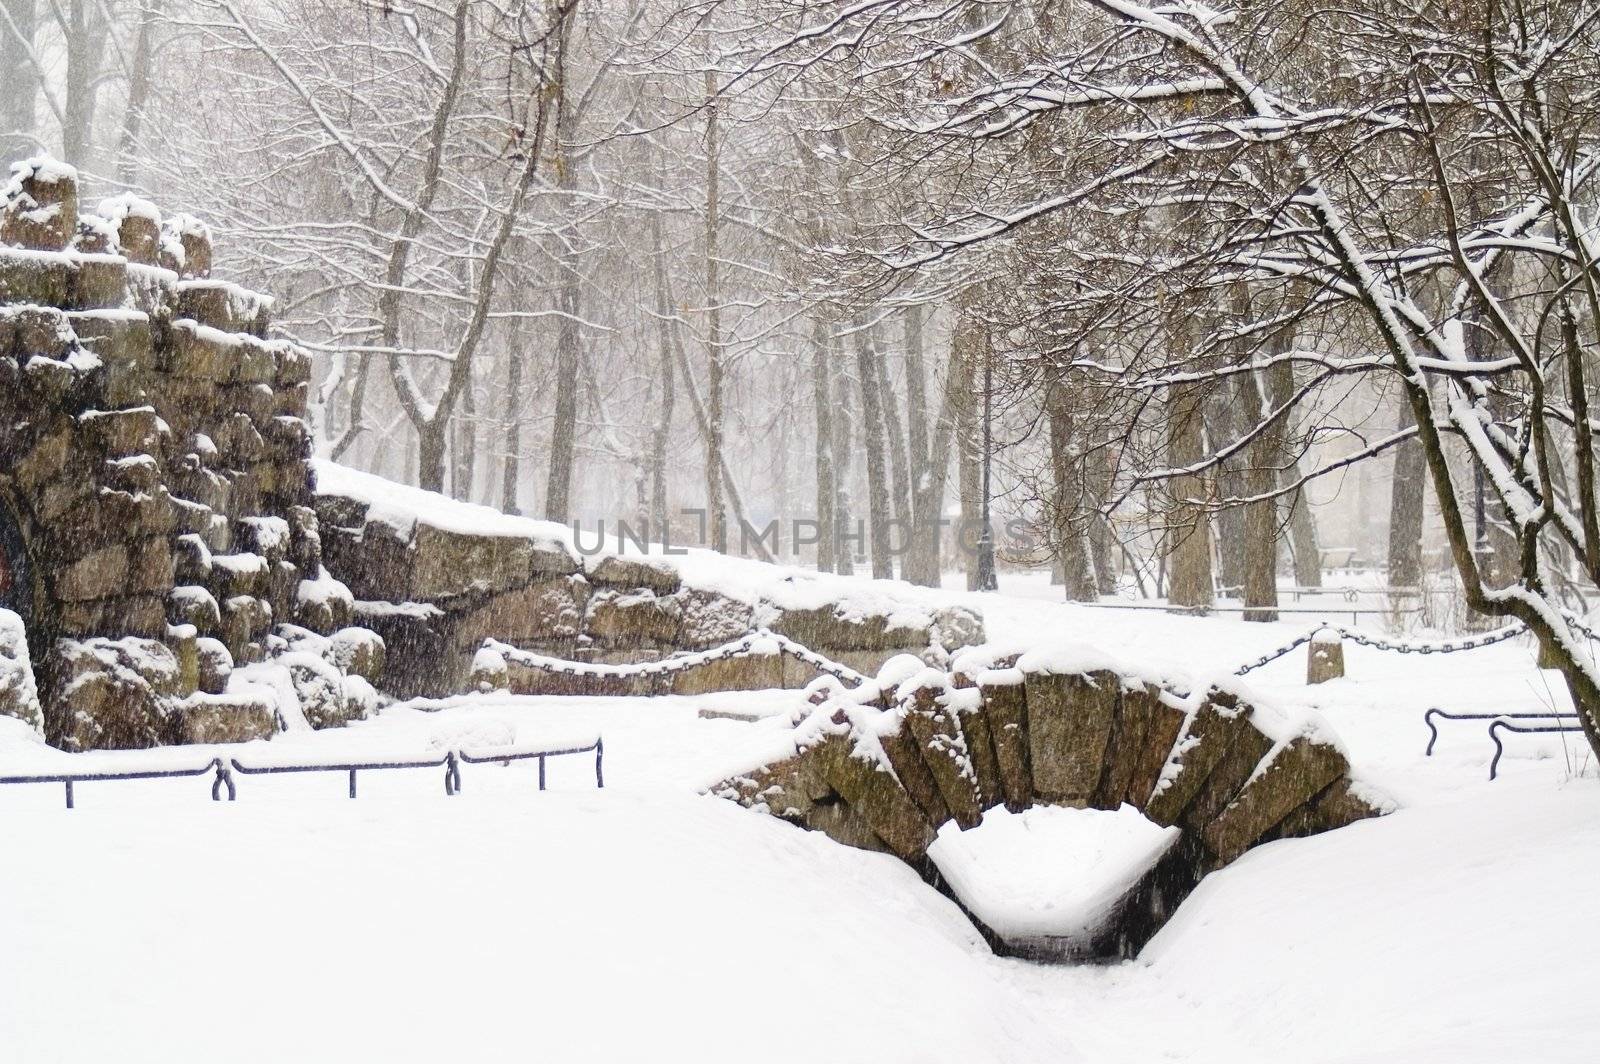 A grotto and a small bridge in a winter park at snowfall.